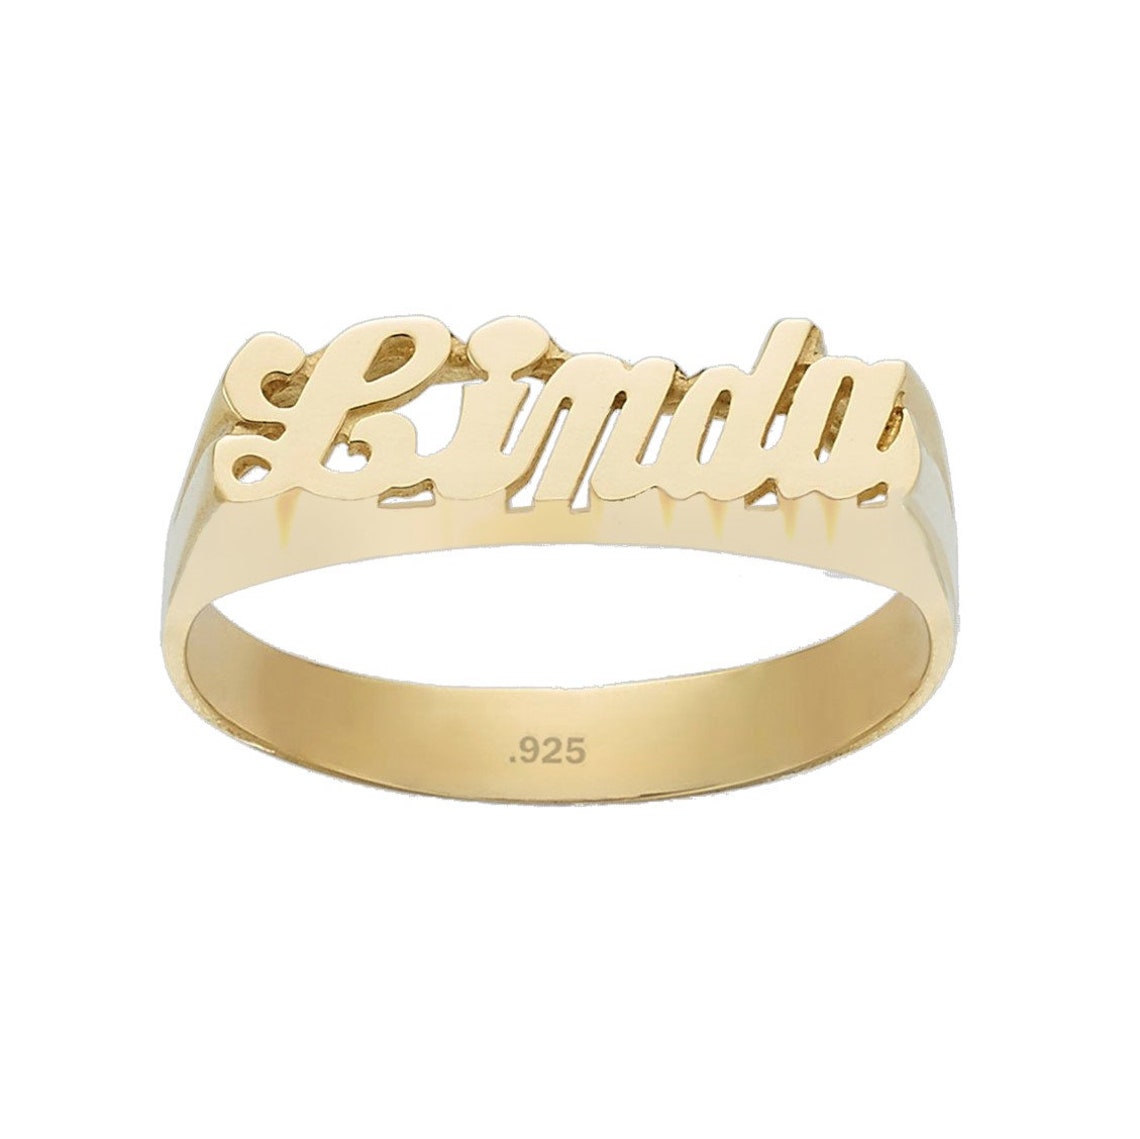 Name Ring 24K Gold Plated Sterling Silver Personalized - Etsy